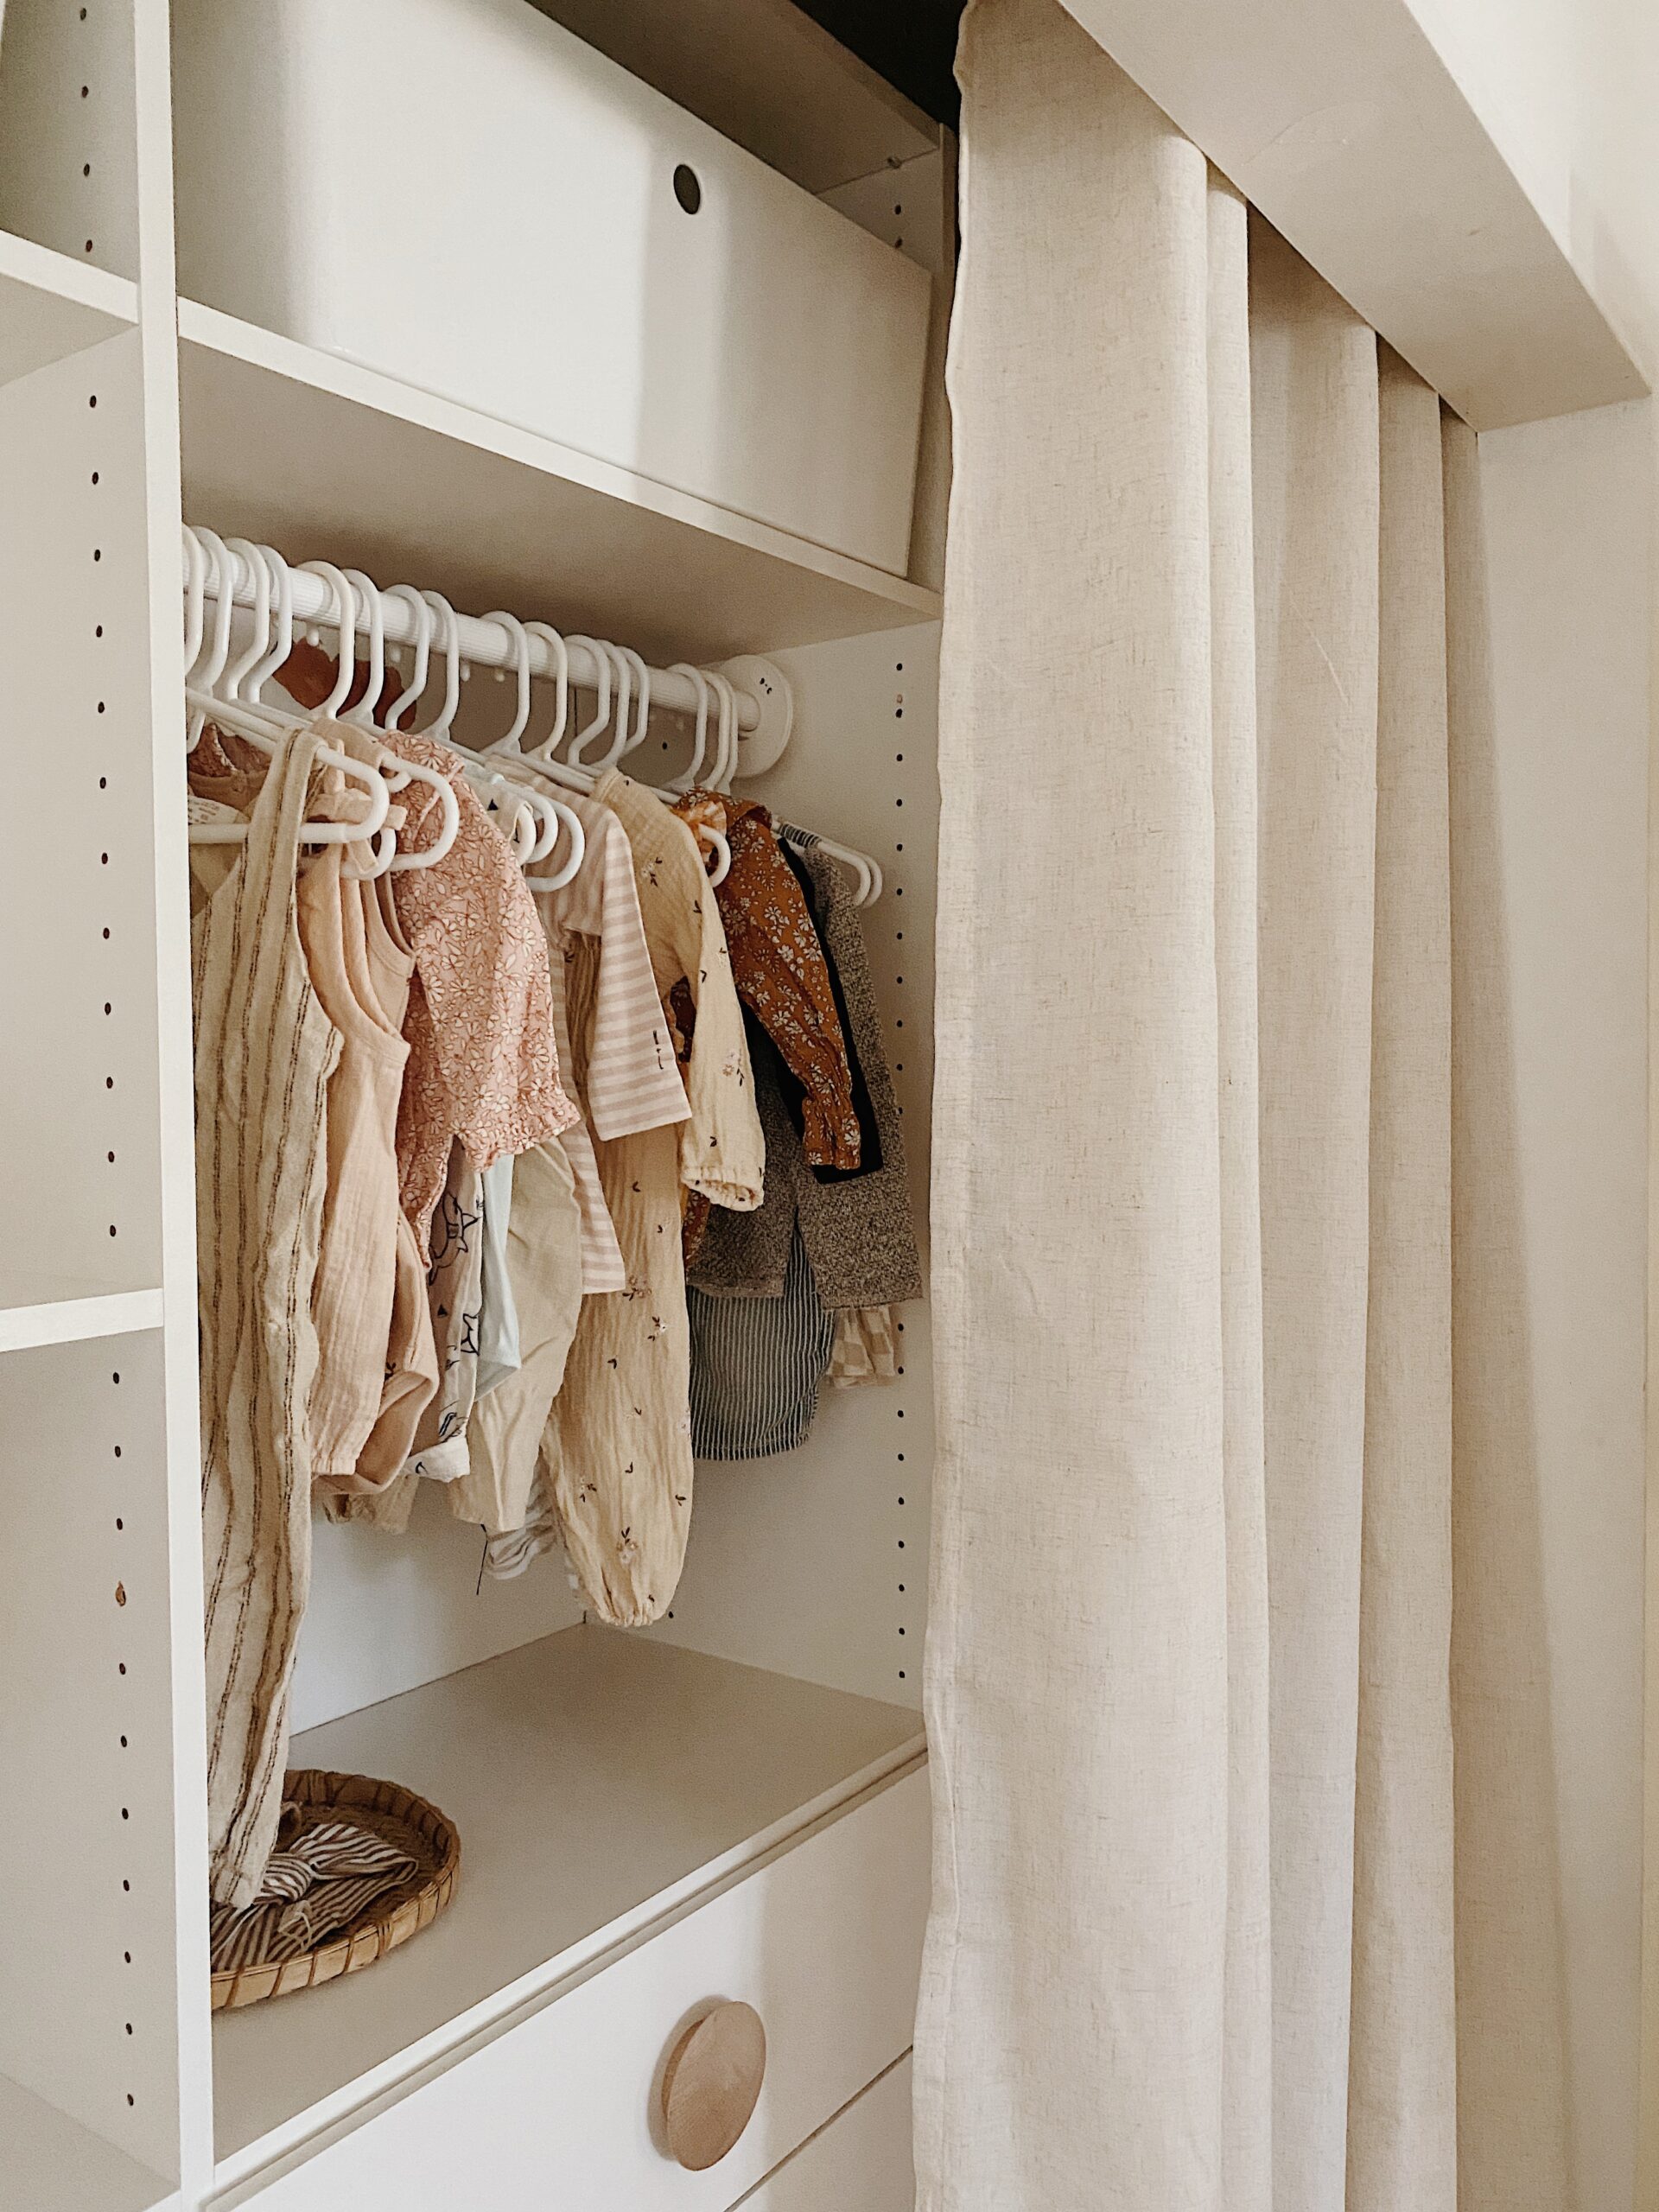 An Organized Nursery Closet Start to Finish - The Homes I Have Made